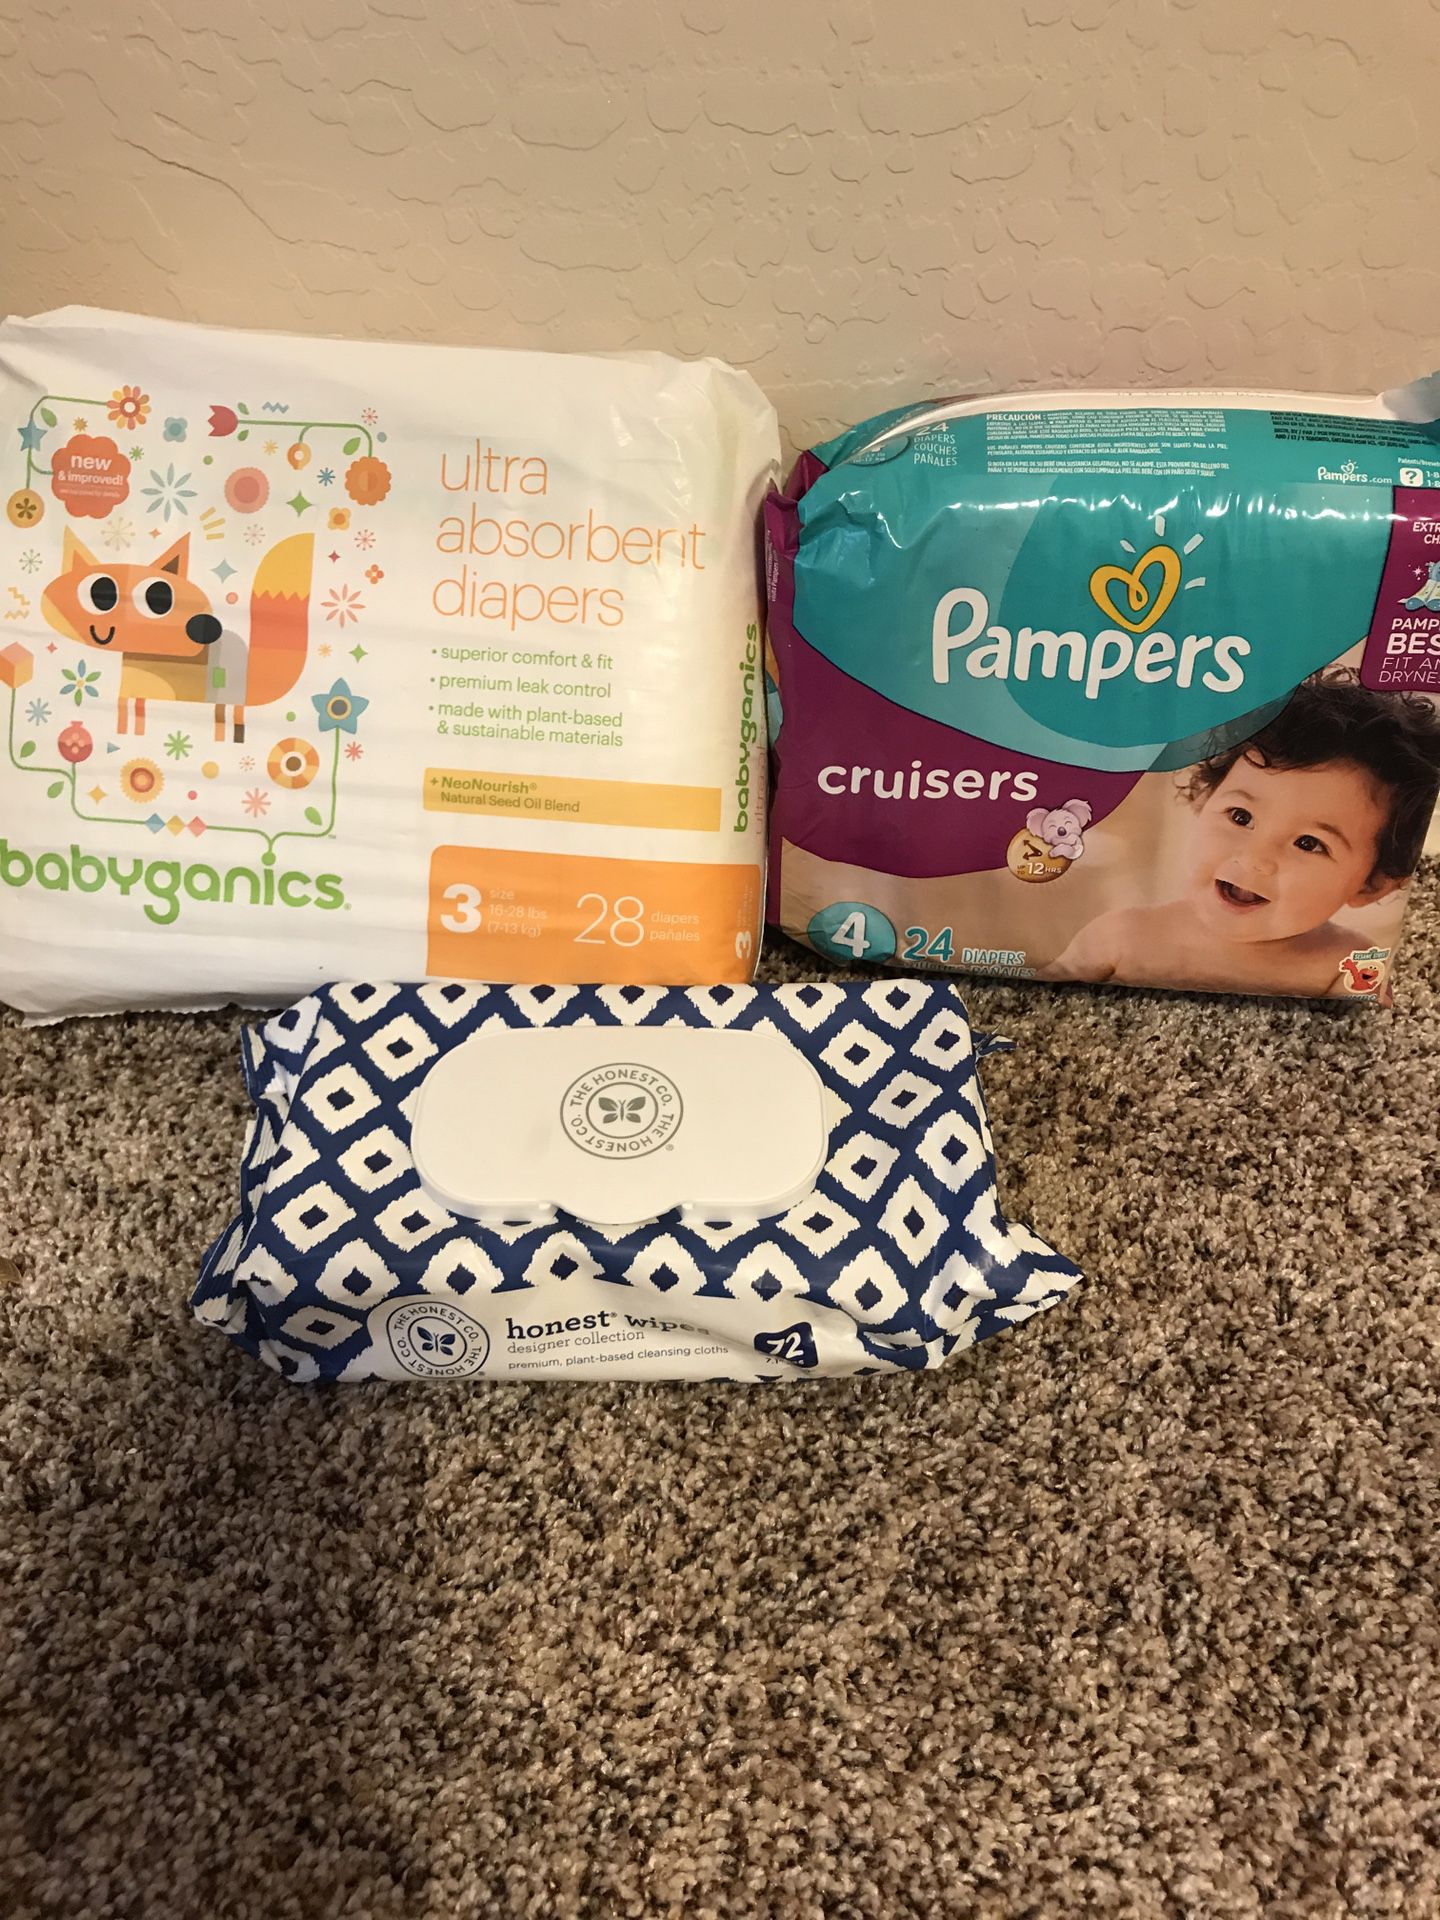 Baby diapers, wipes, and clothes hanger